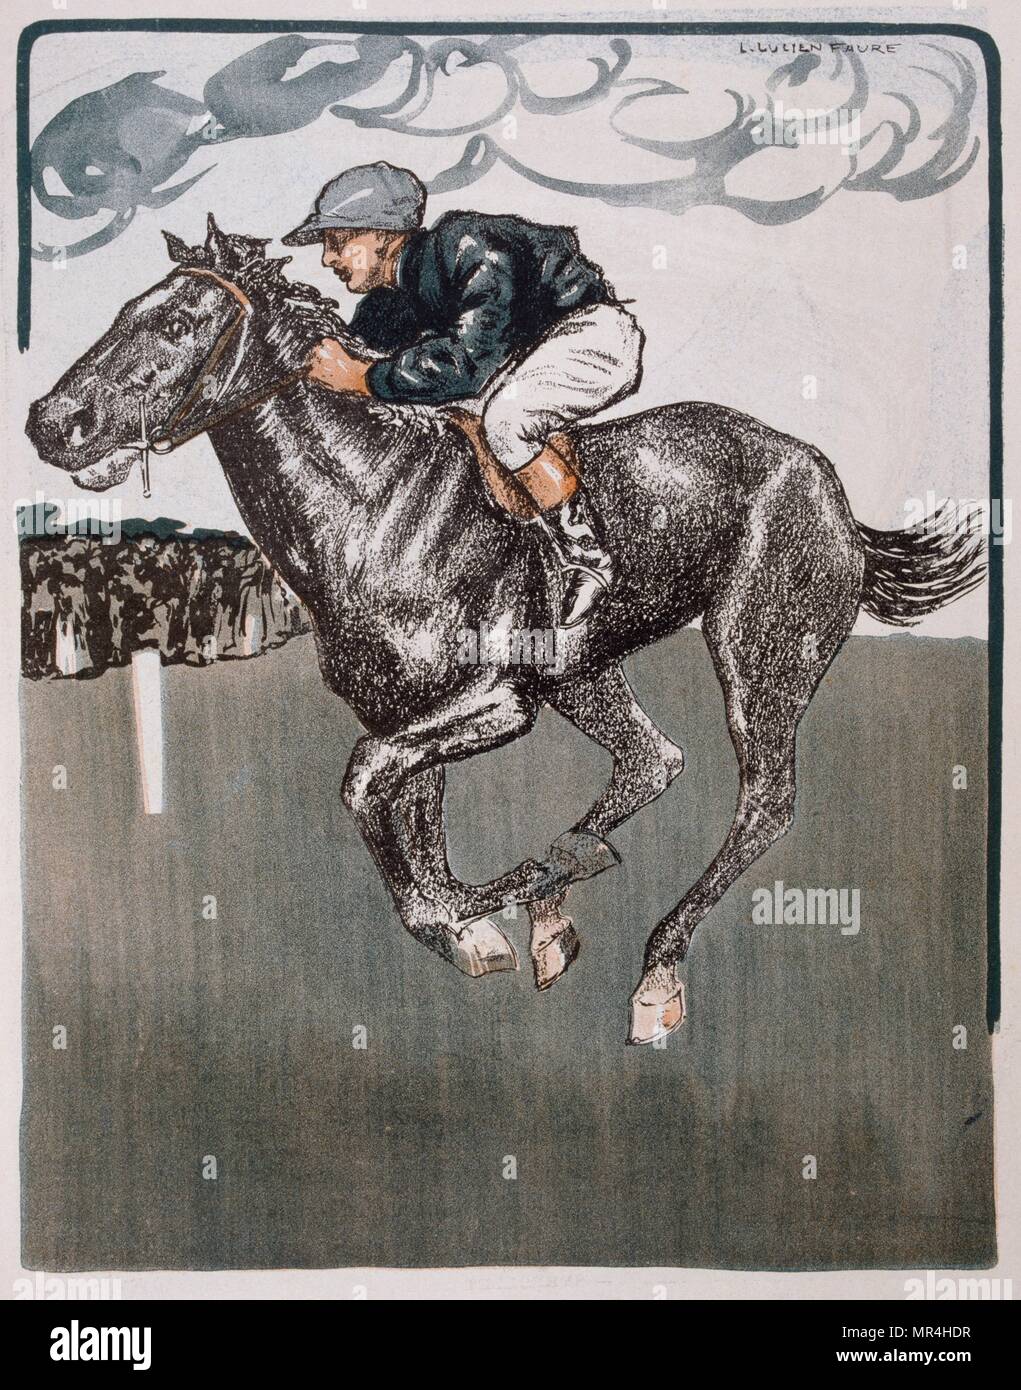 The French horse 'Hippisme' ridden by the Jockey G. STERN 1902 Stock Photo